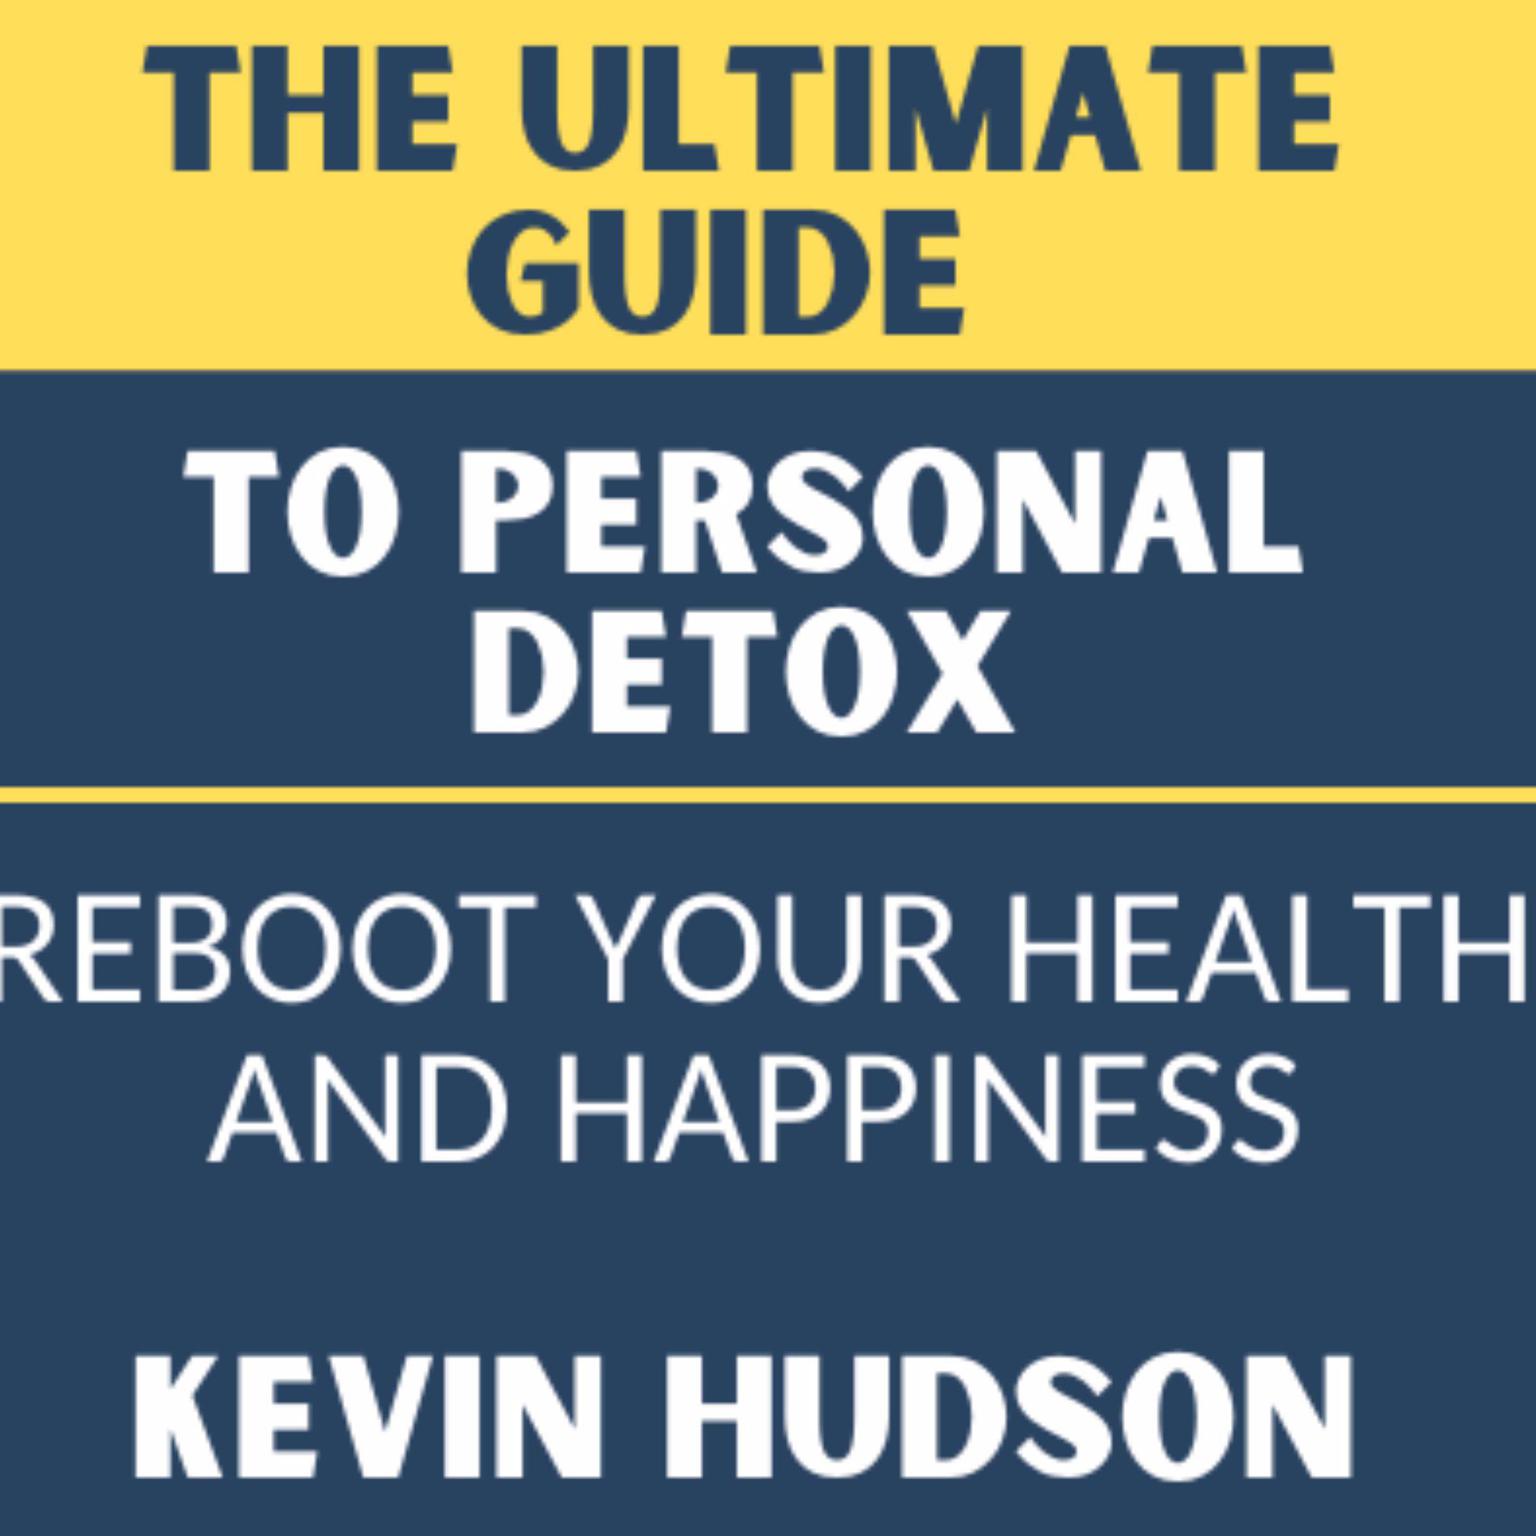 The Ultimate Guide To Personal Detox Audiobook, by kevin Hudson